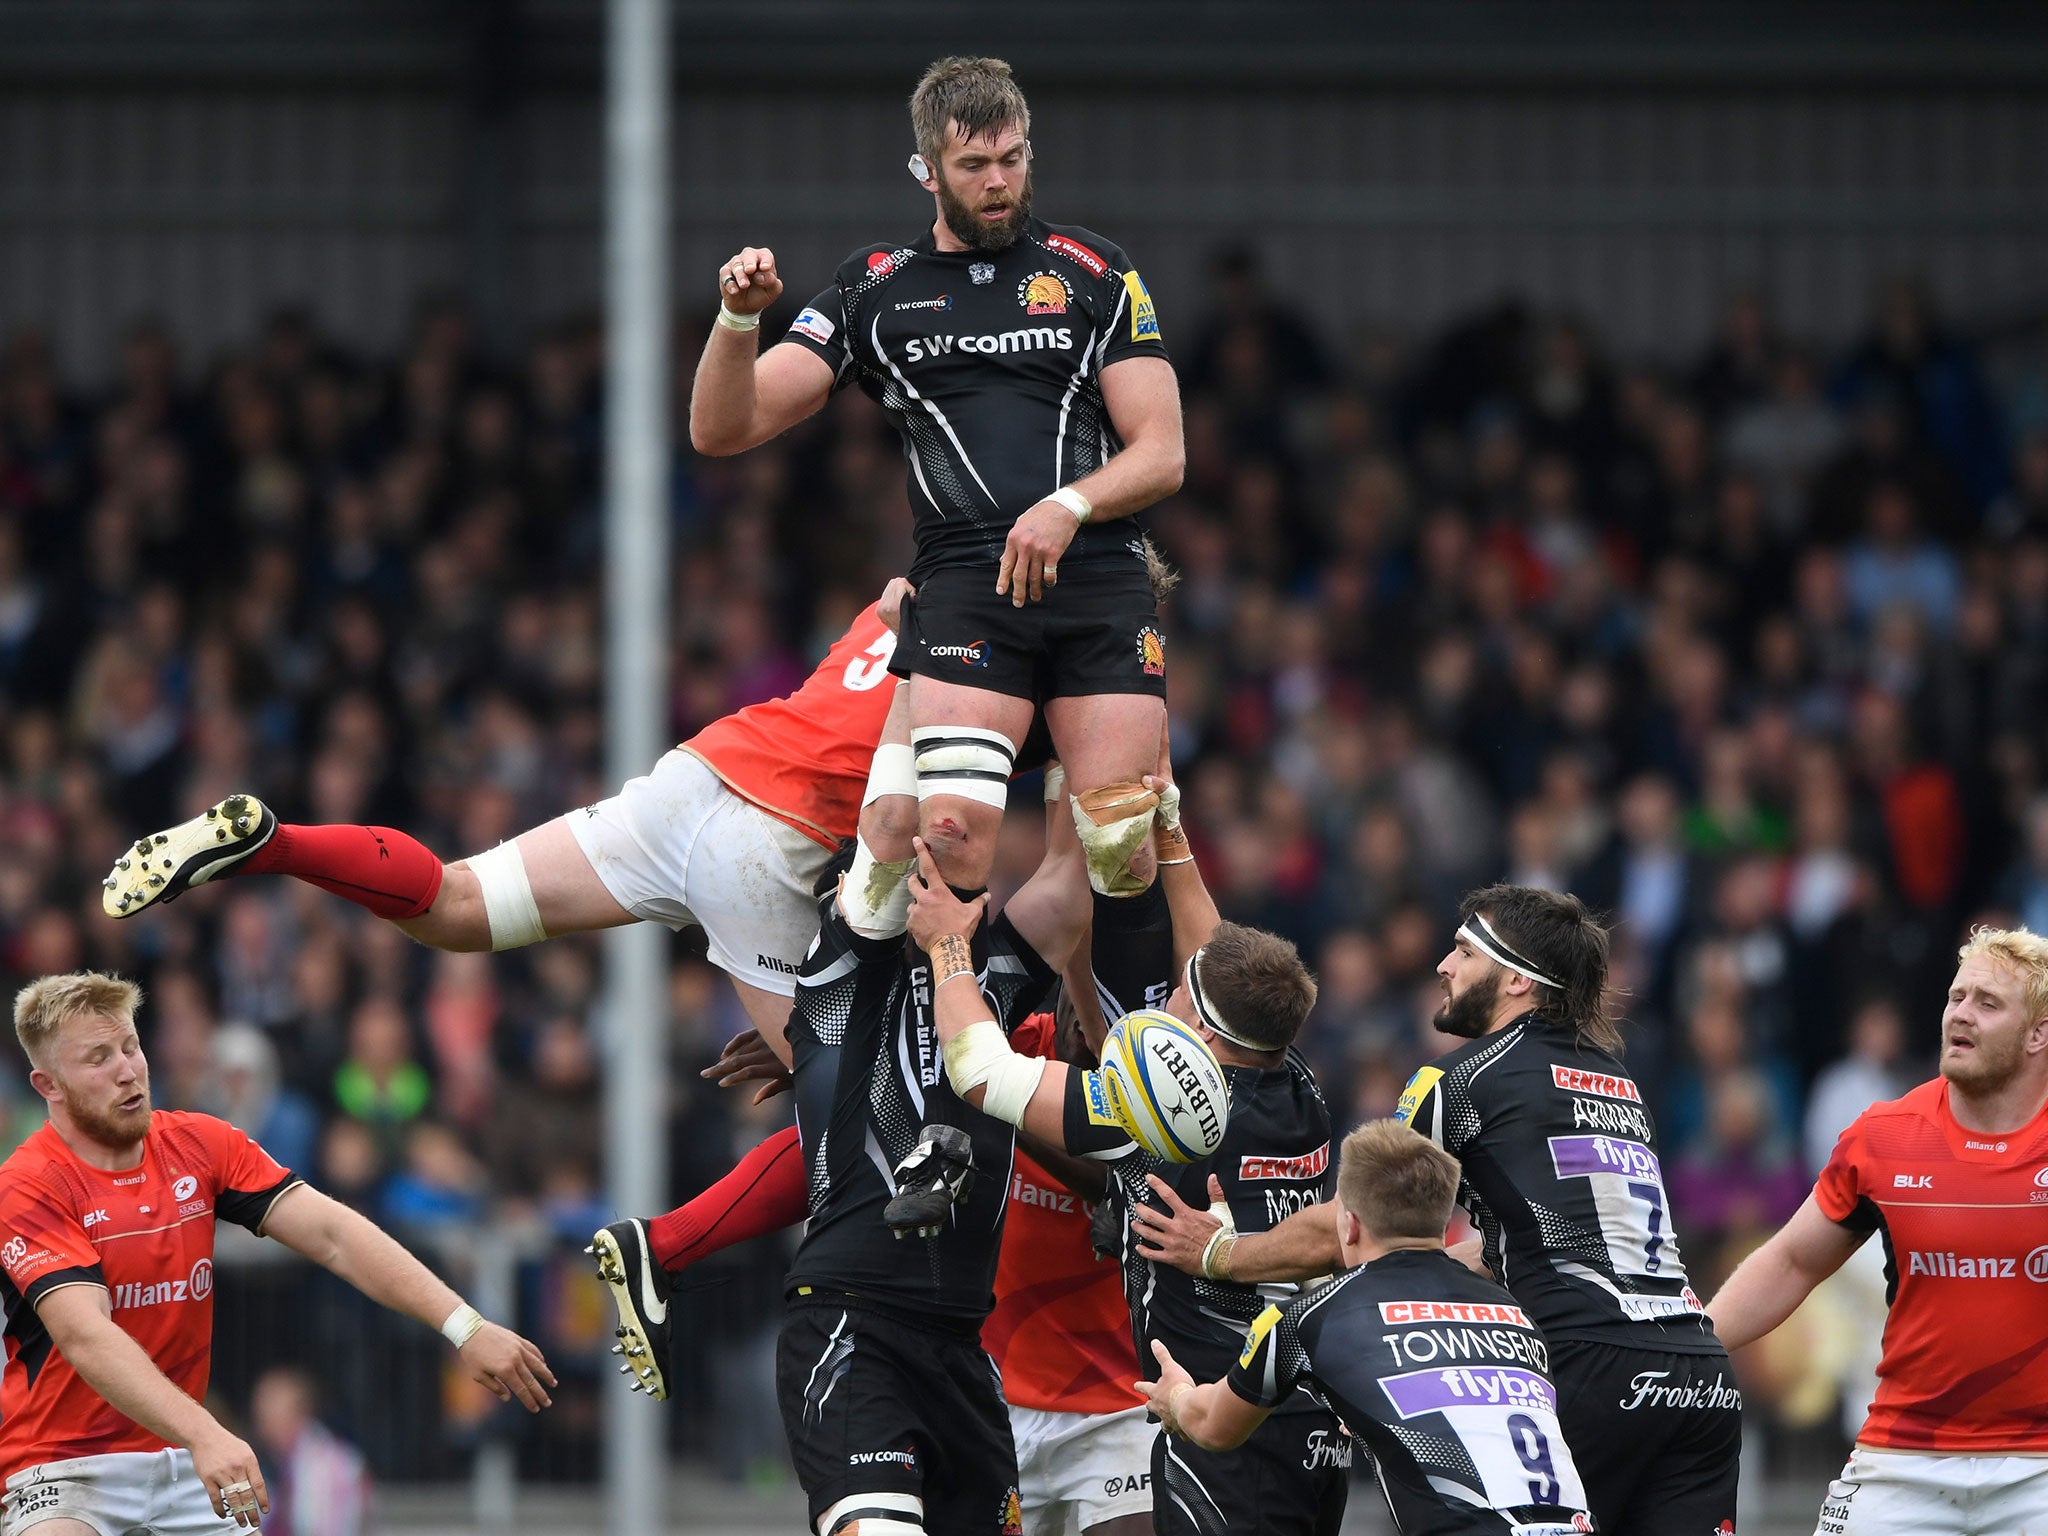 Geoff Parling in action at an Exeter line-out